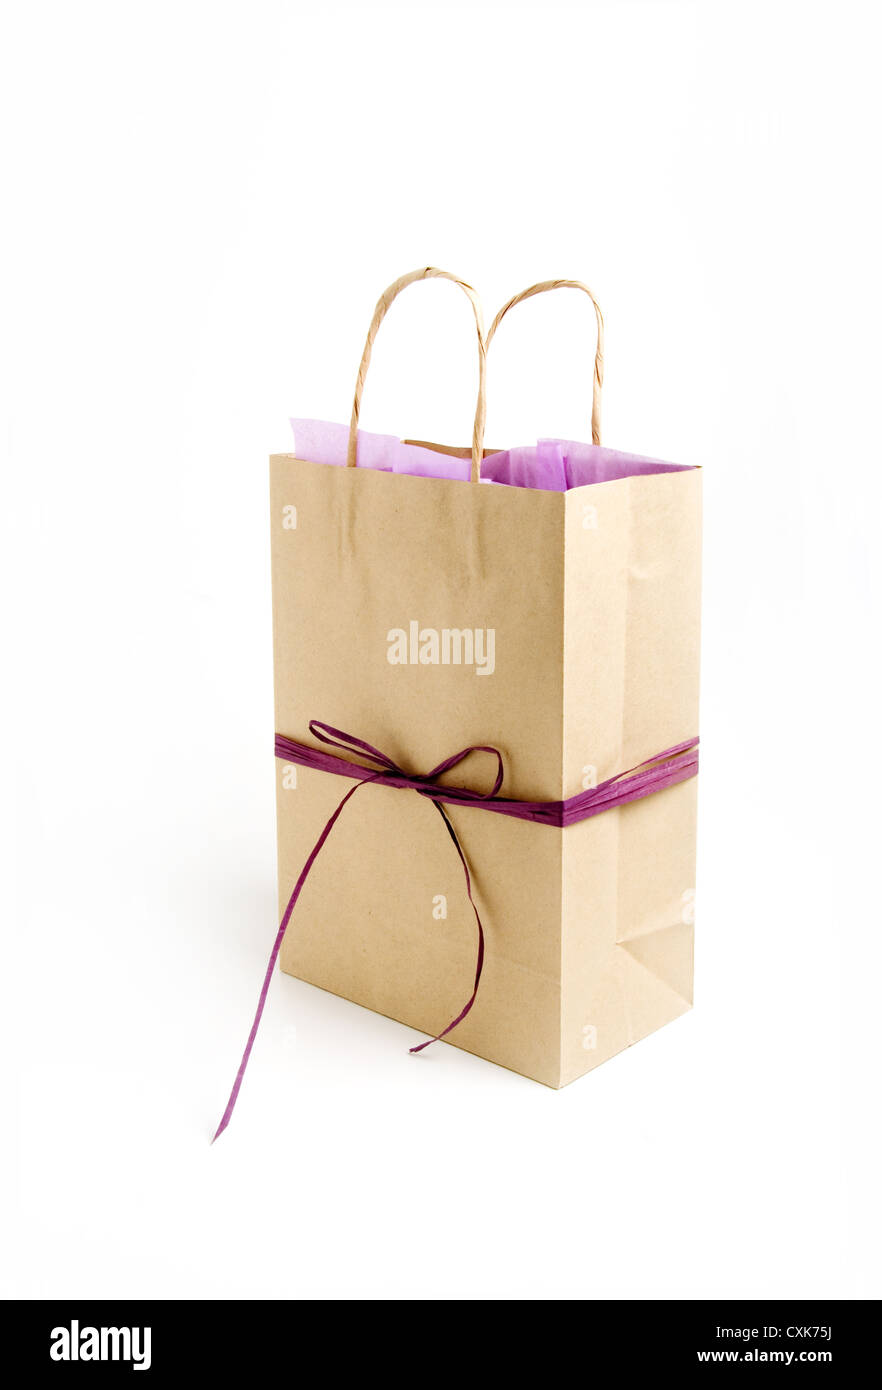 Gift bag on white background cut out. Stock Photo